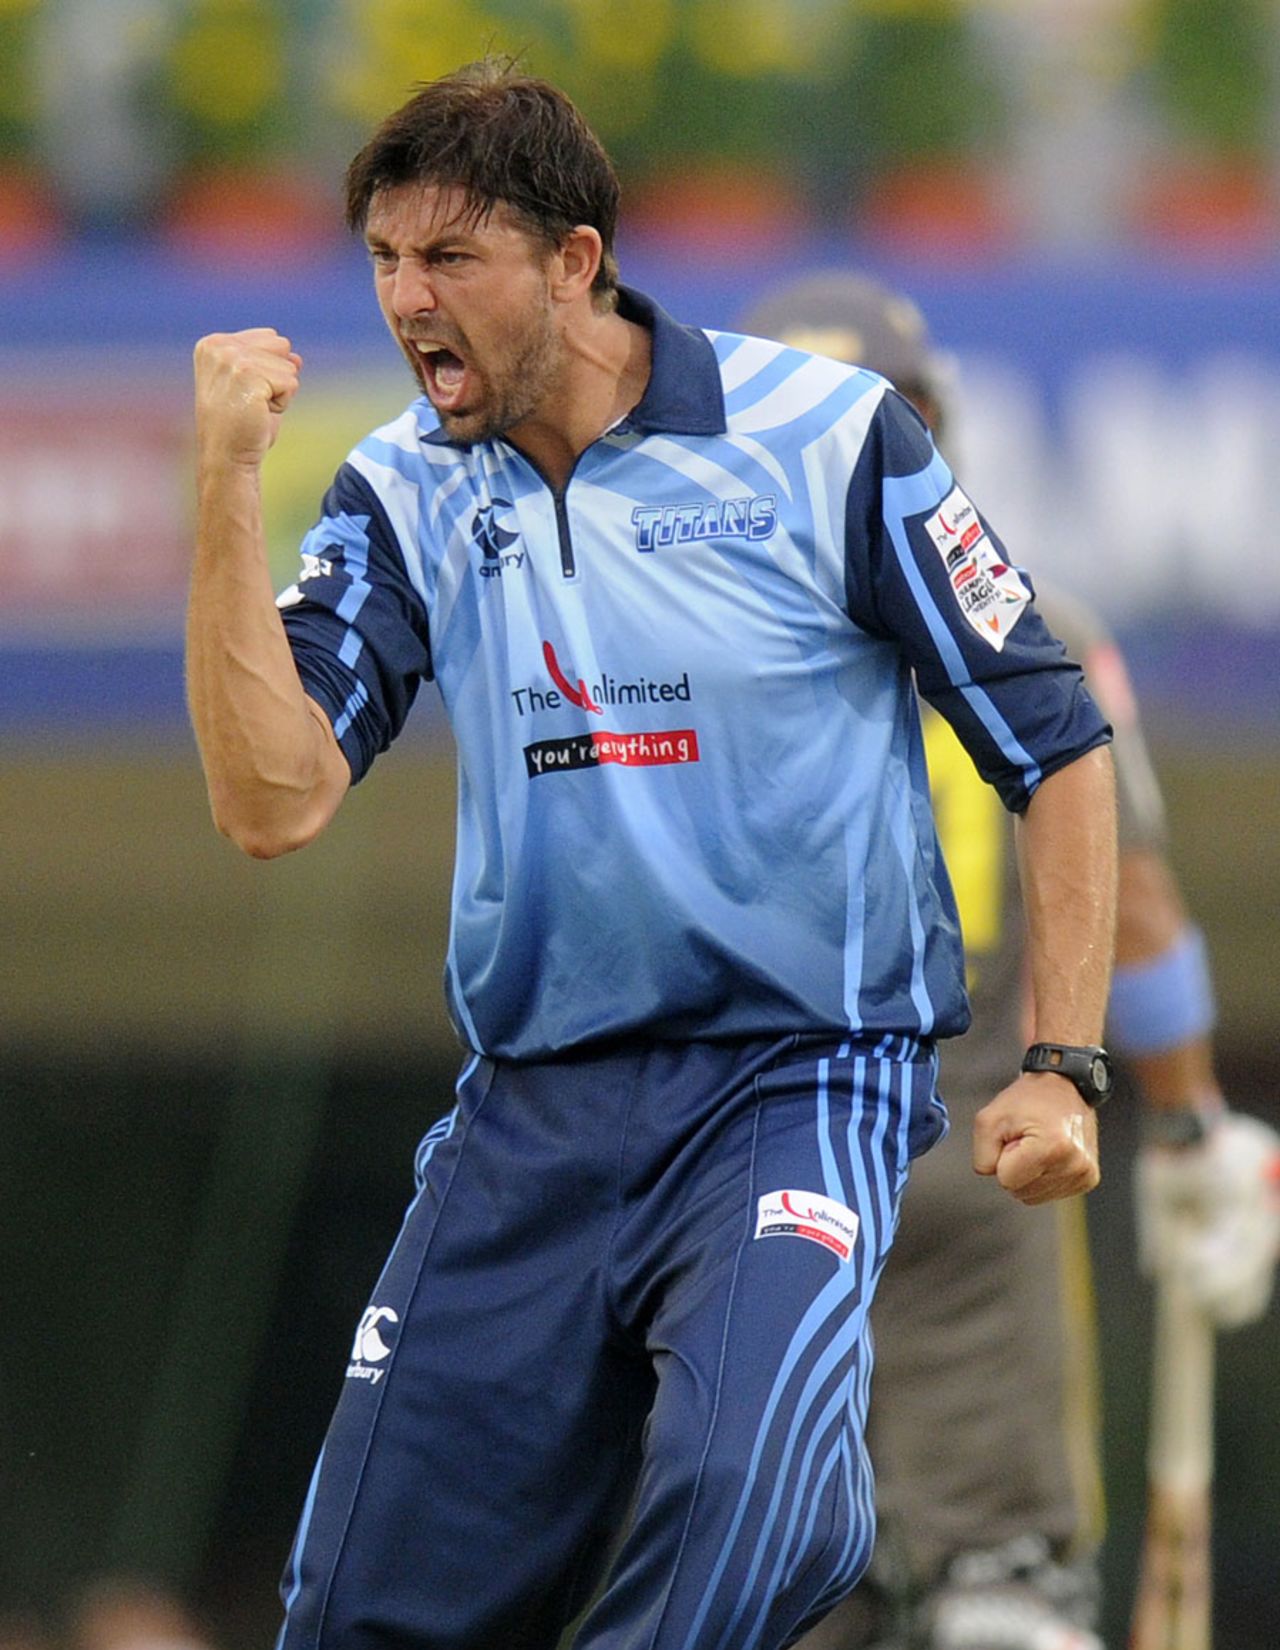 David Wiese finished with 3 for 17, Titans v Sunrisers Hyderabad, Champions League 2013, Group B, Ranchi, September 28, 2013